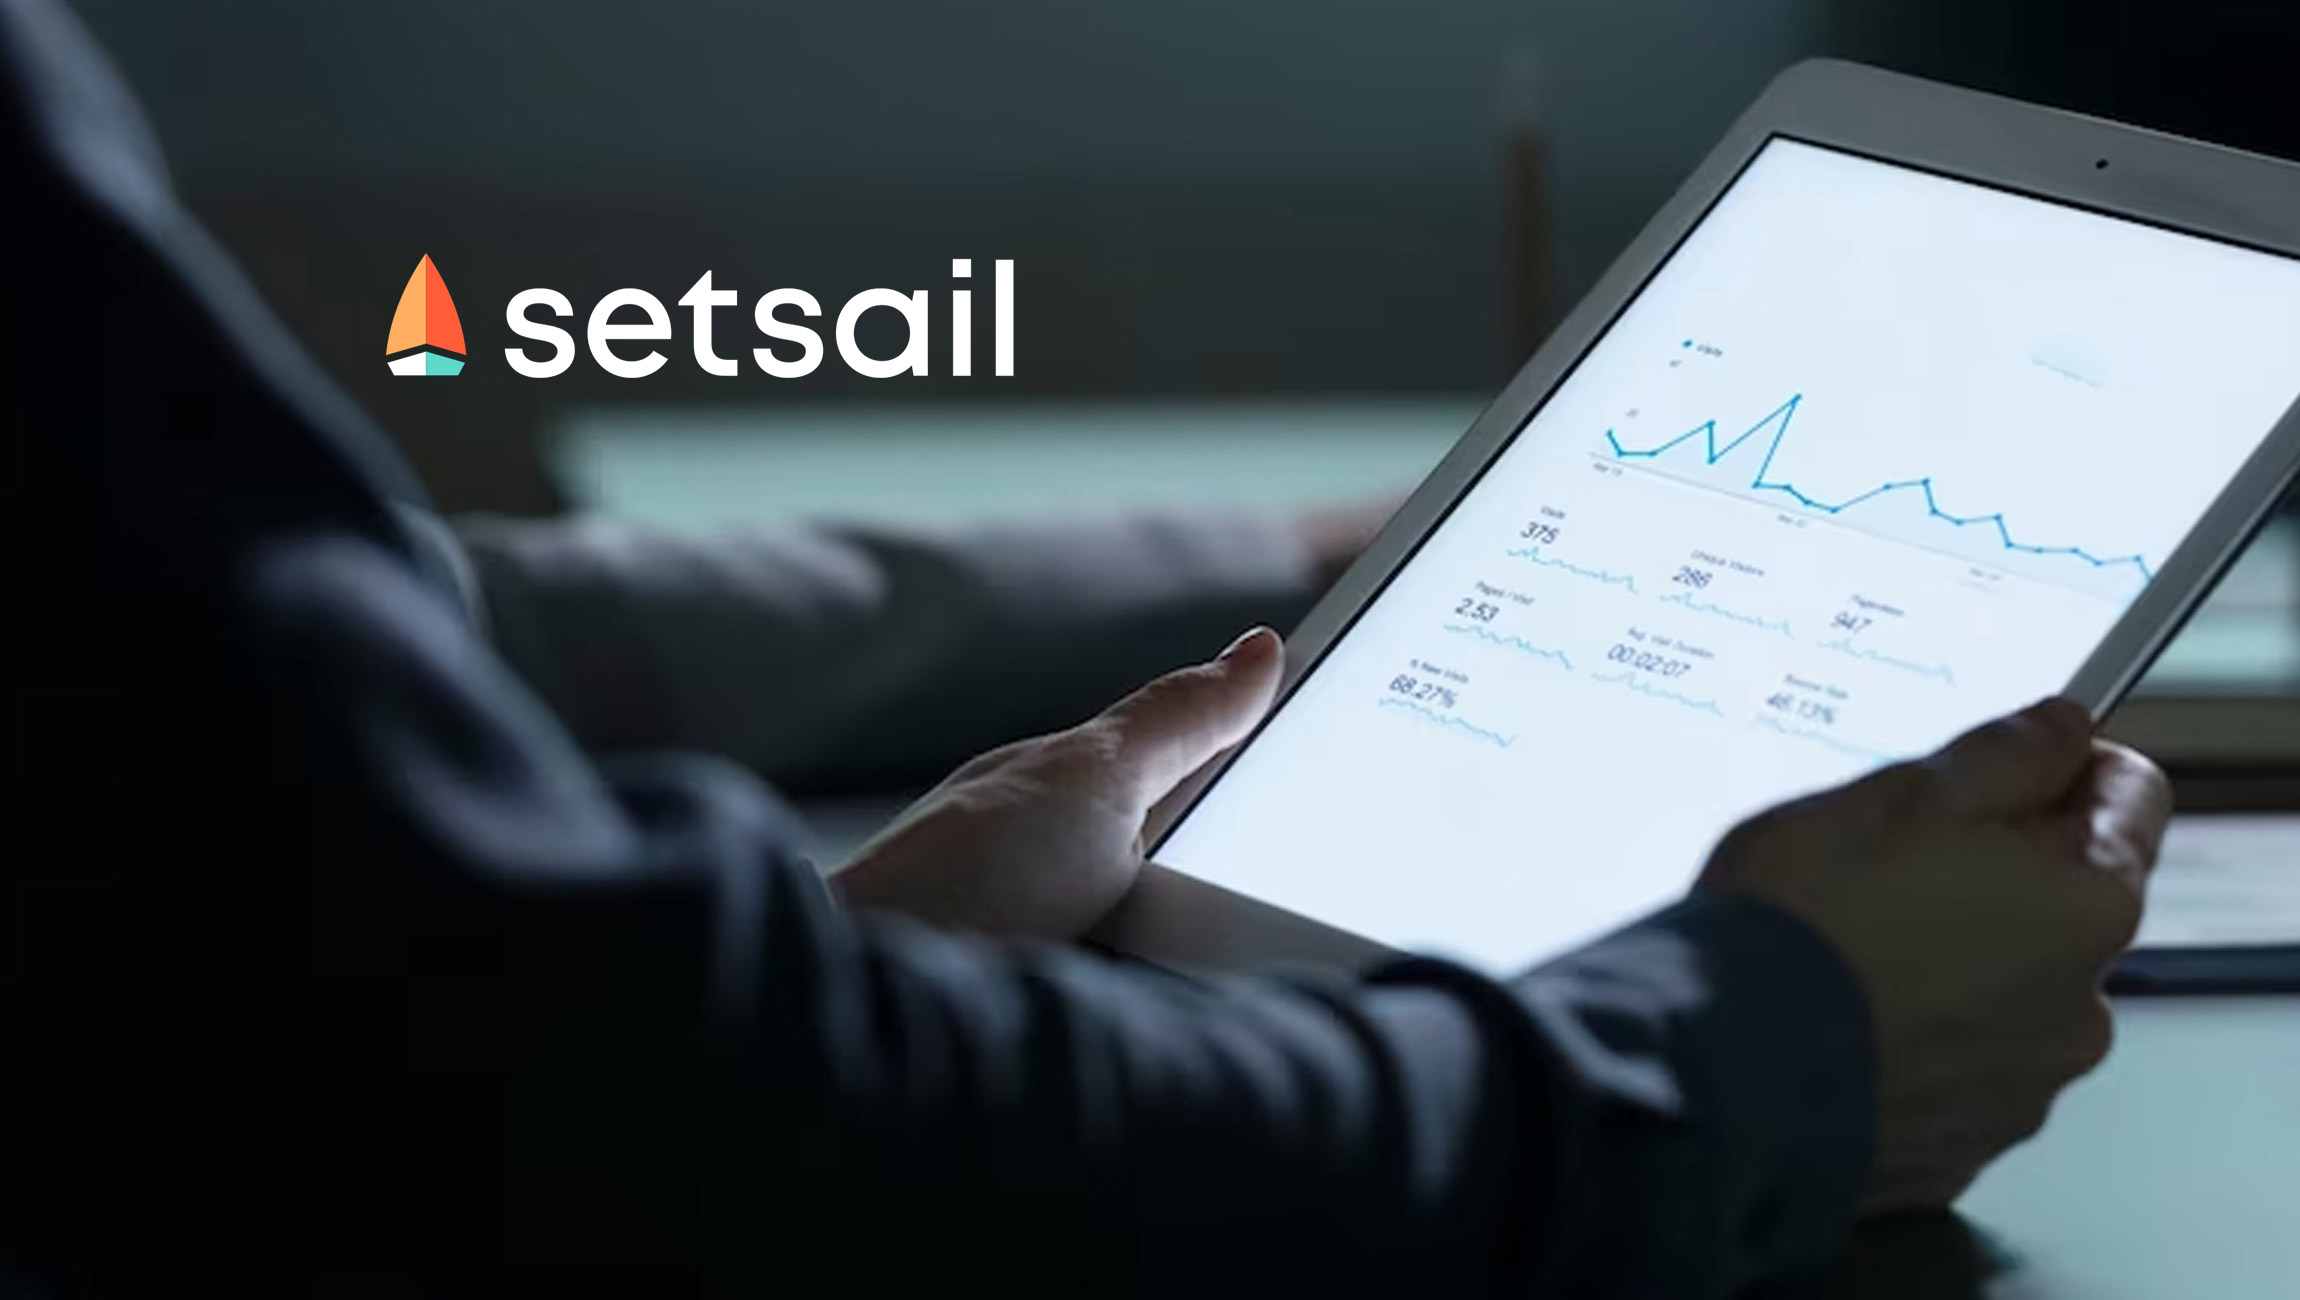 SetSail Launches Customizable “Targets” Dashboard to Help Sales Leaders Easily Track and Improve Rep Performance